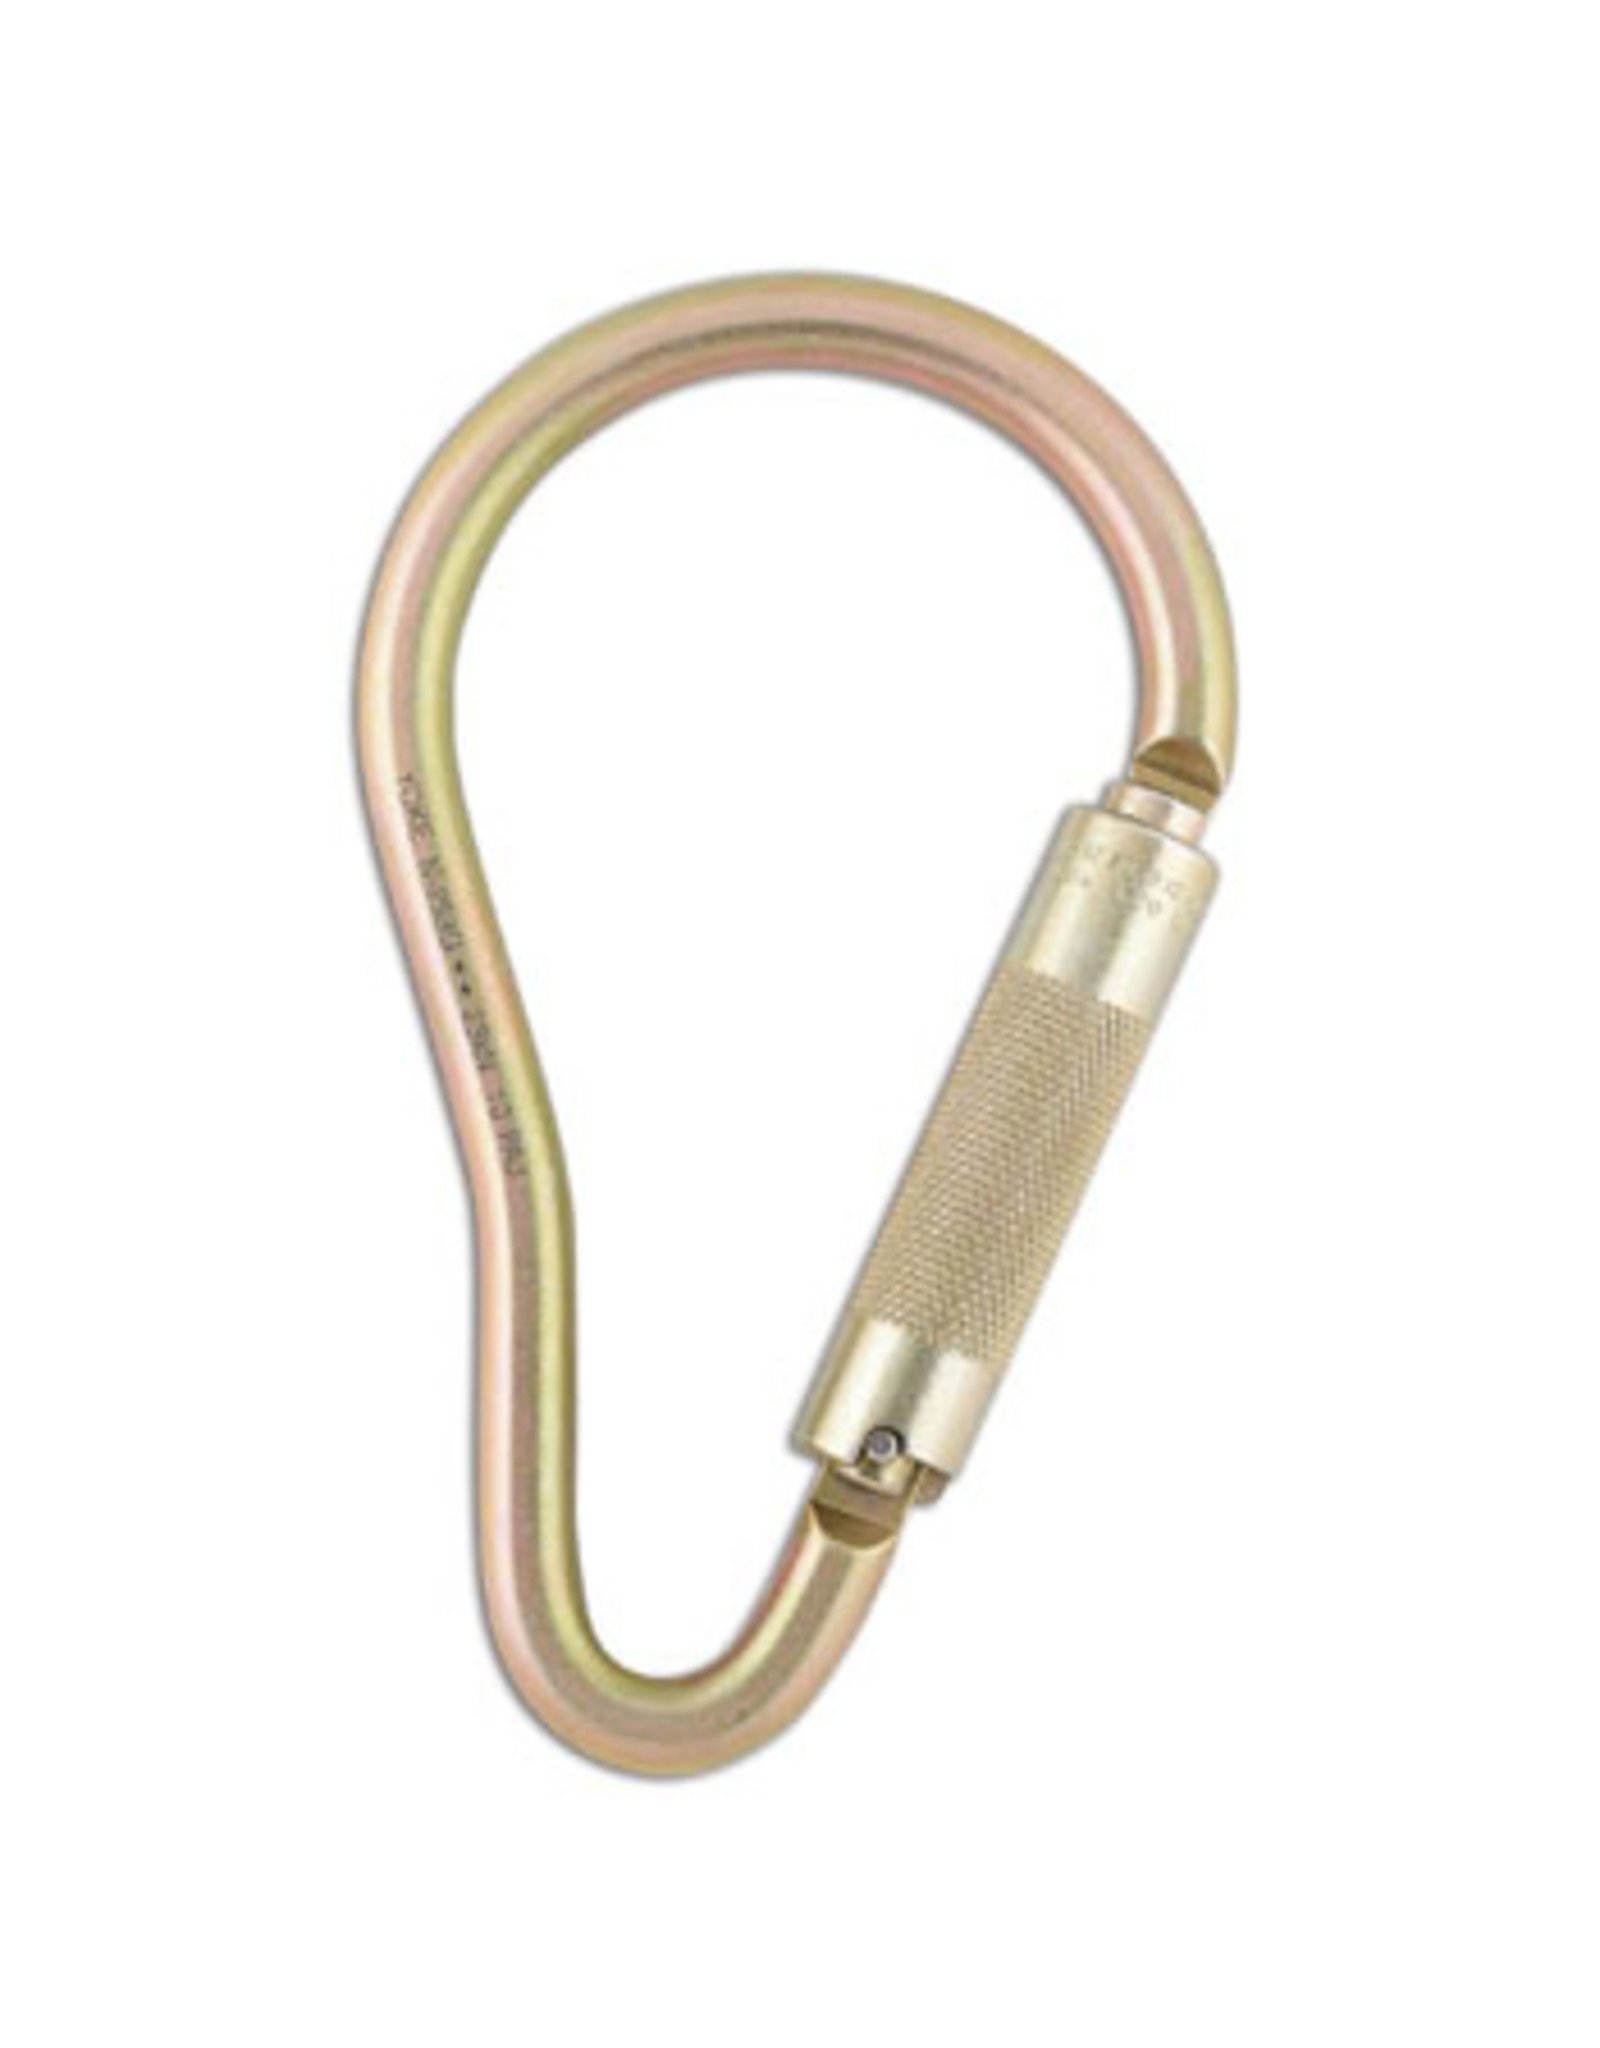 Carabiner Connector, Large Pear Shaped with 1/4 turn twist lock 2-1/4 in opening